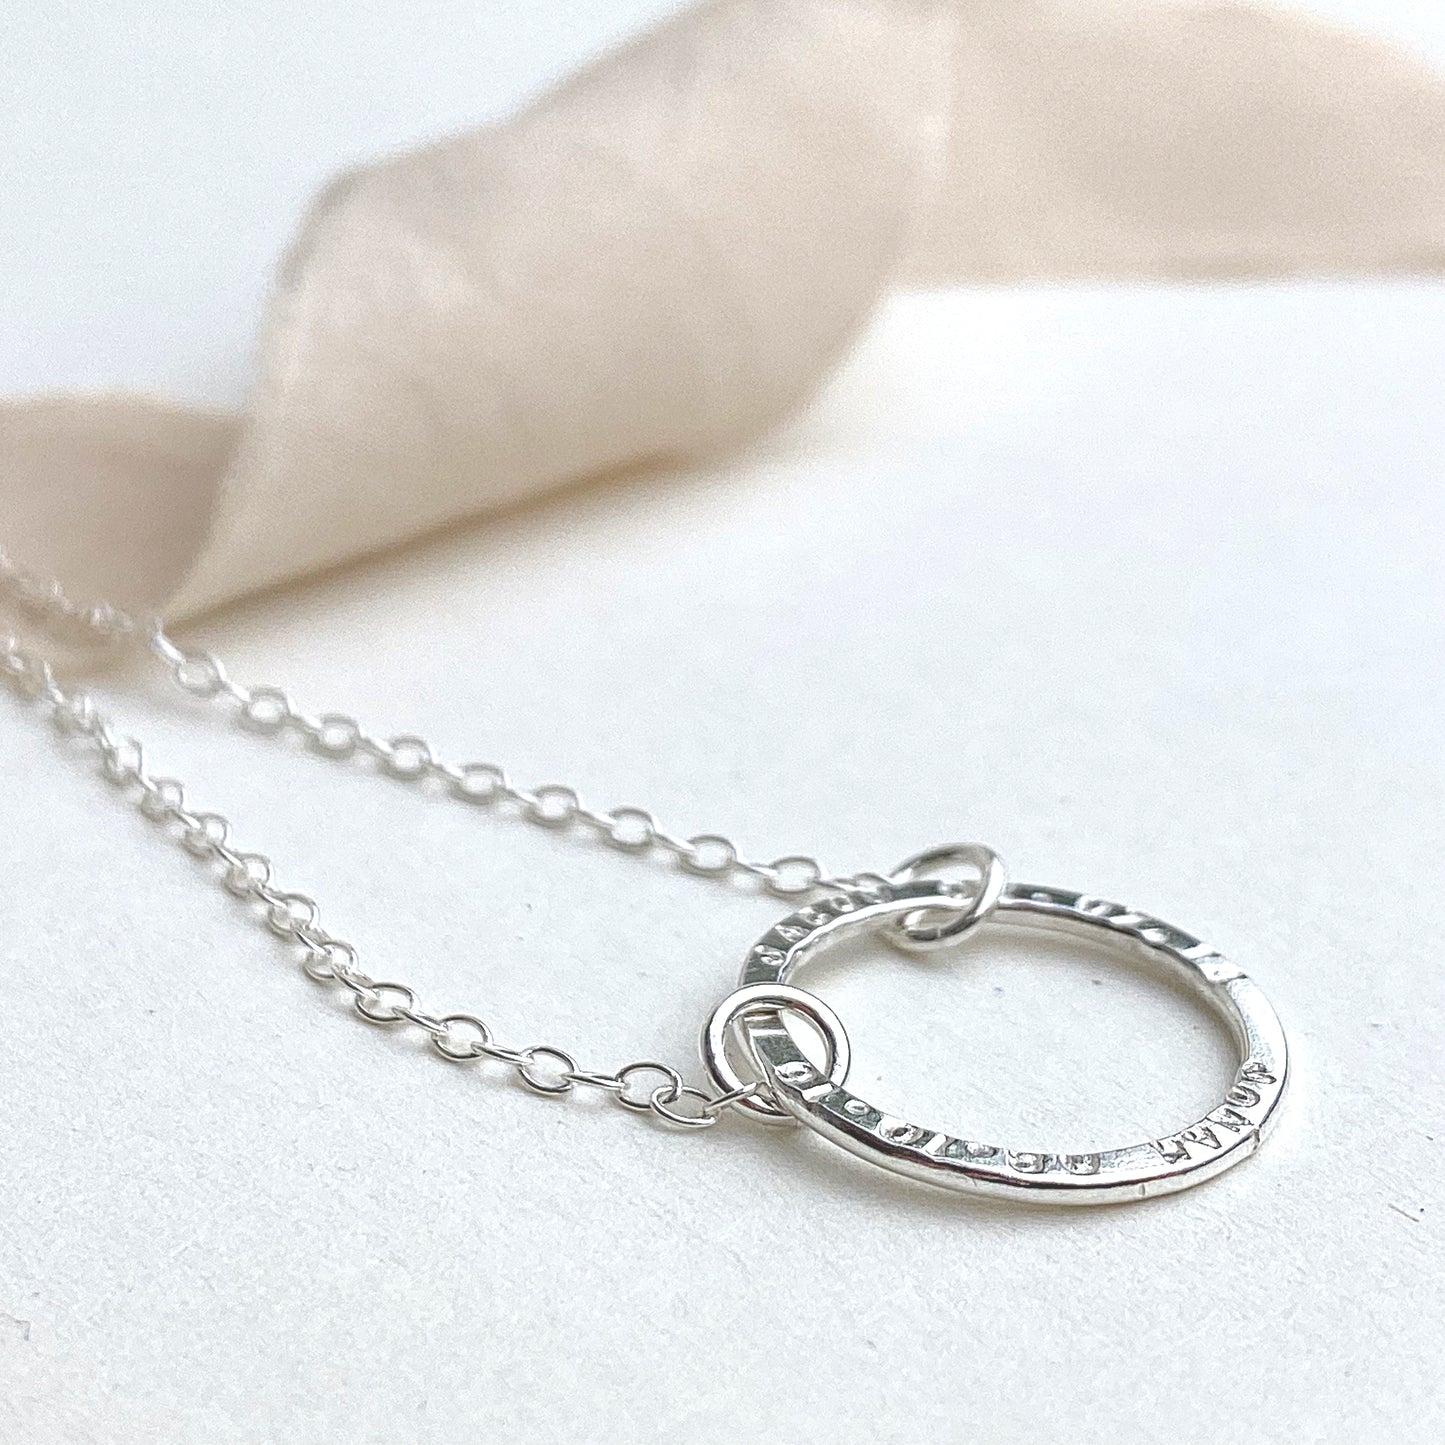 The Helm Personalised Necklace - sterling silver hoop pendant.